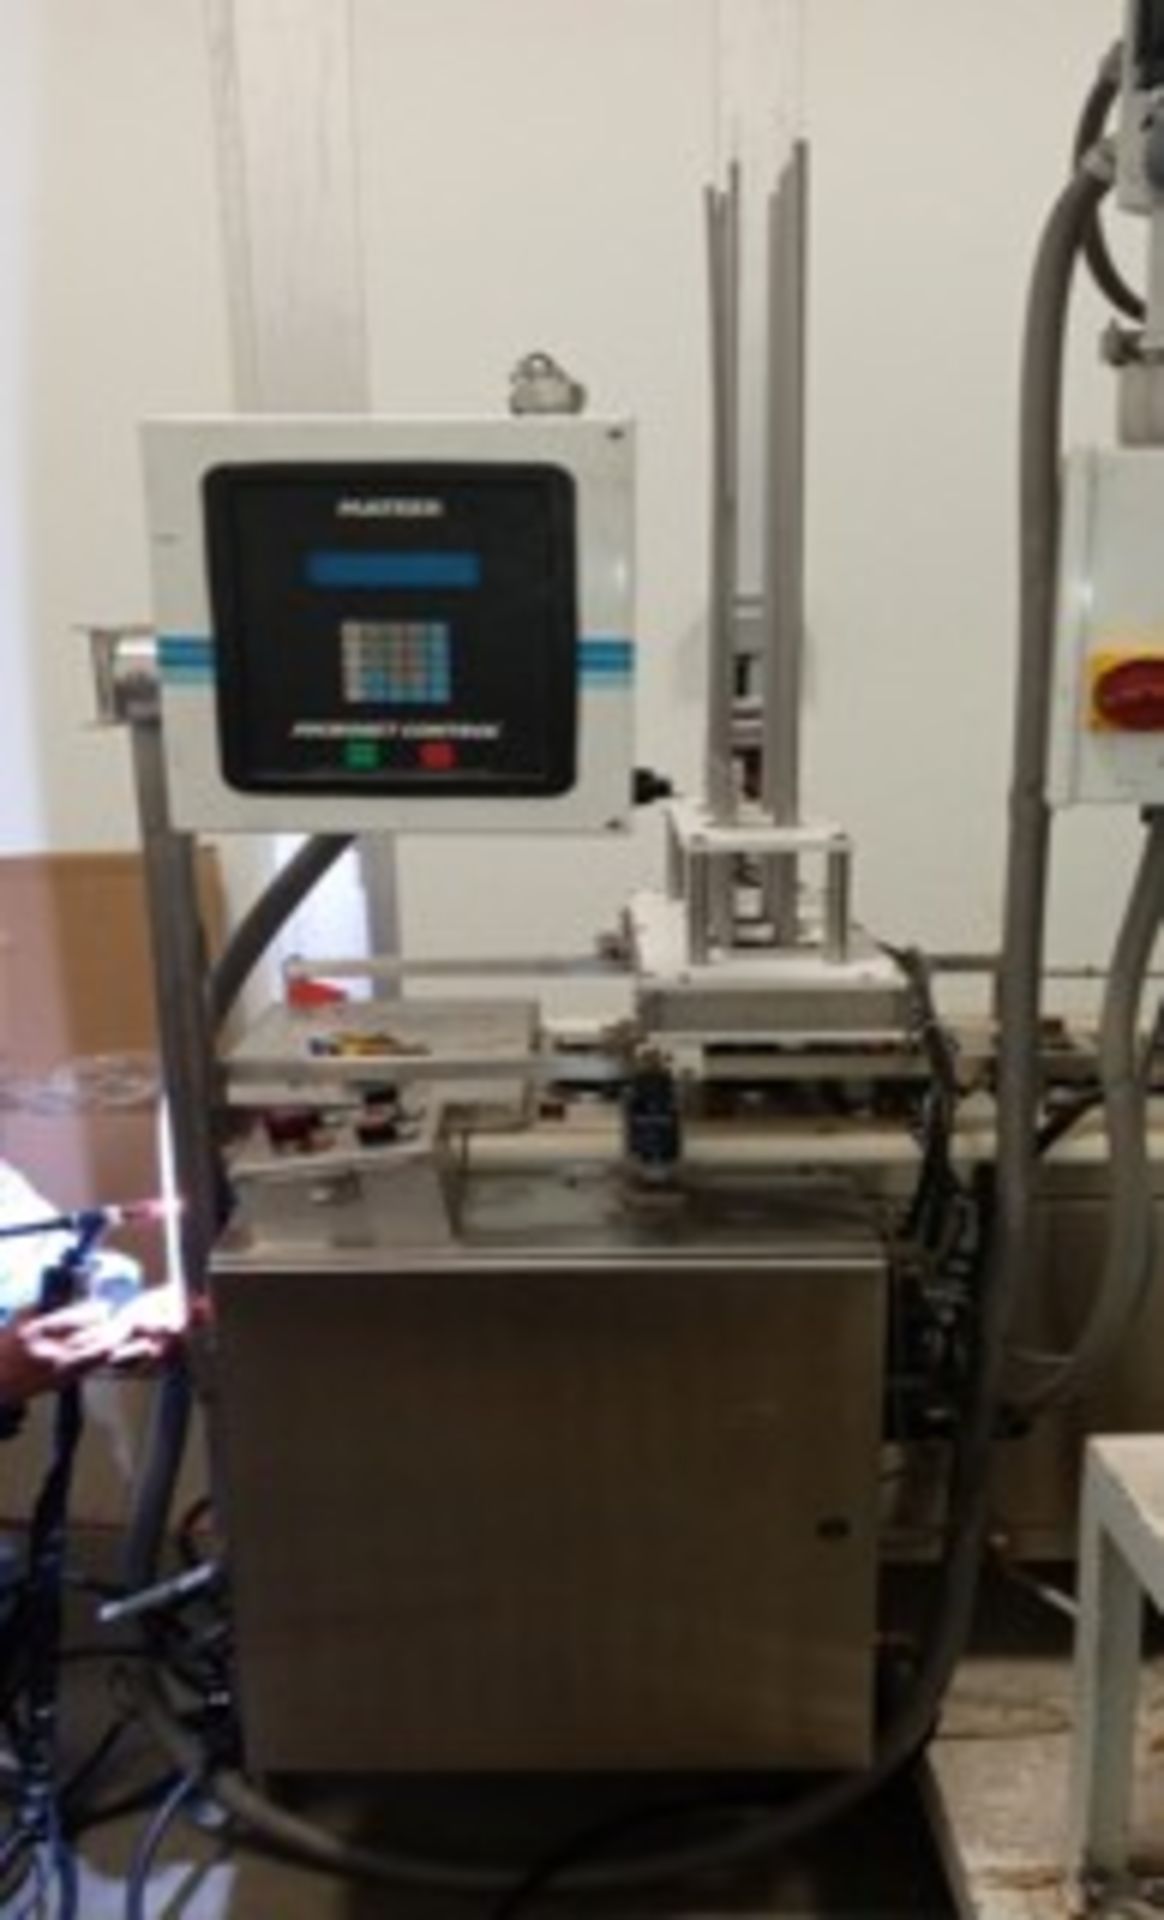 Autoprod VS-1X2 Cup Filling System, S/N 1412, Volt 460, Phase 3, Last Used for Dry Products - Image 4 of 7